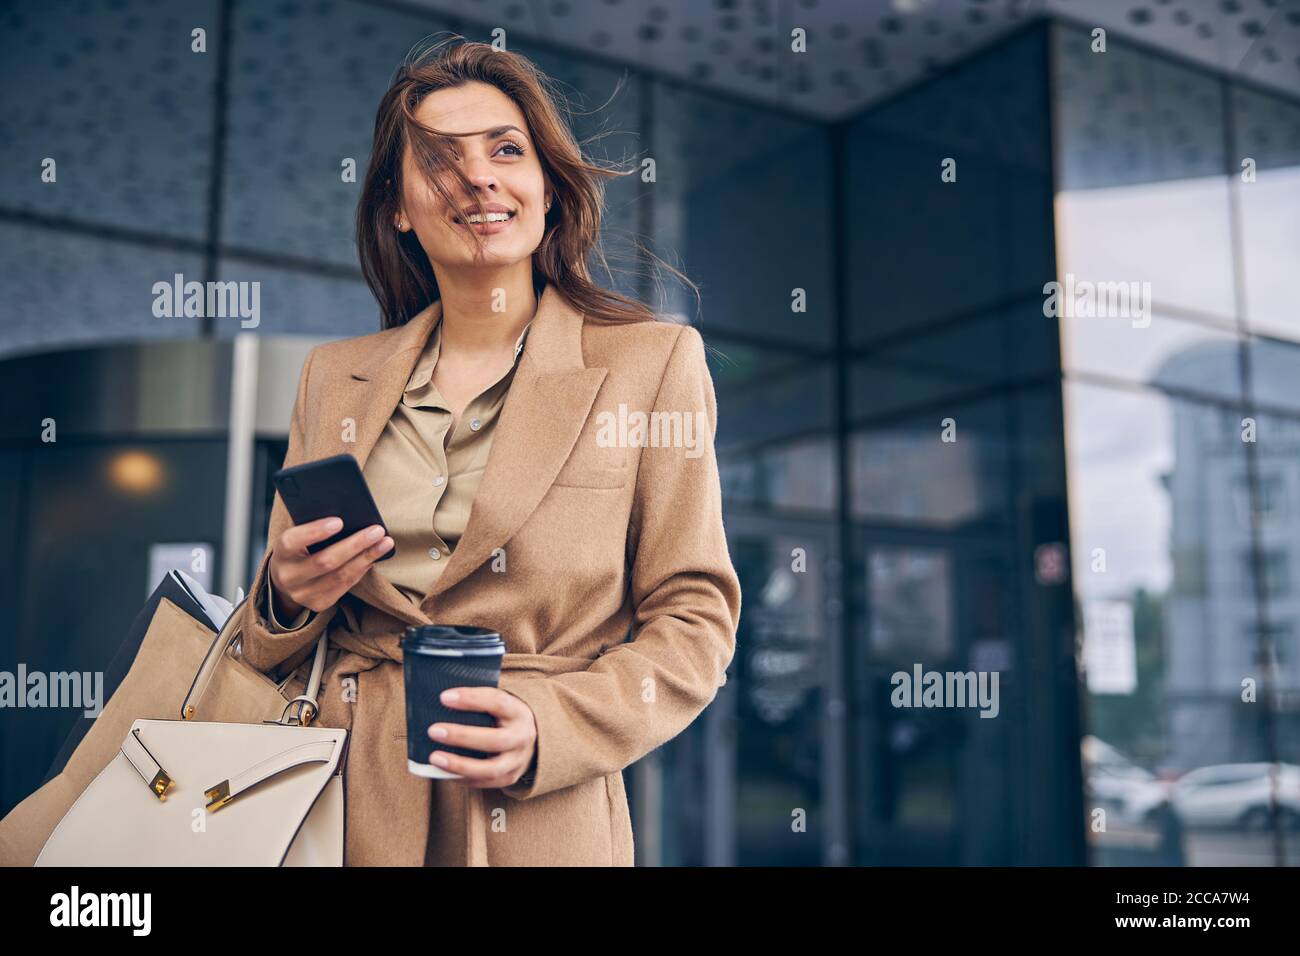 Smiling woman holding a paper coffee cup Stock Photo